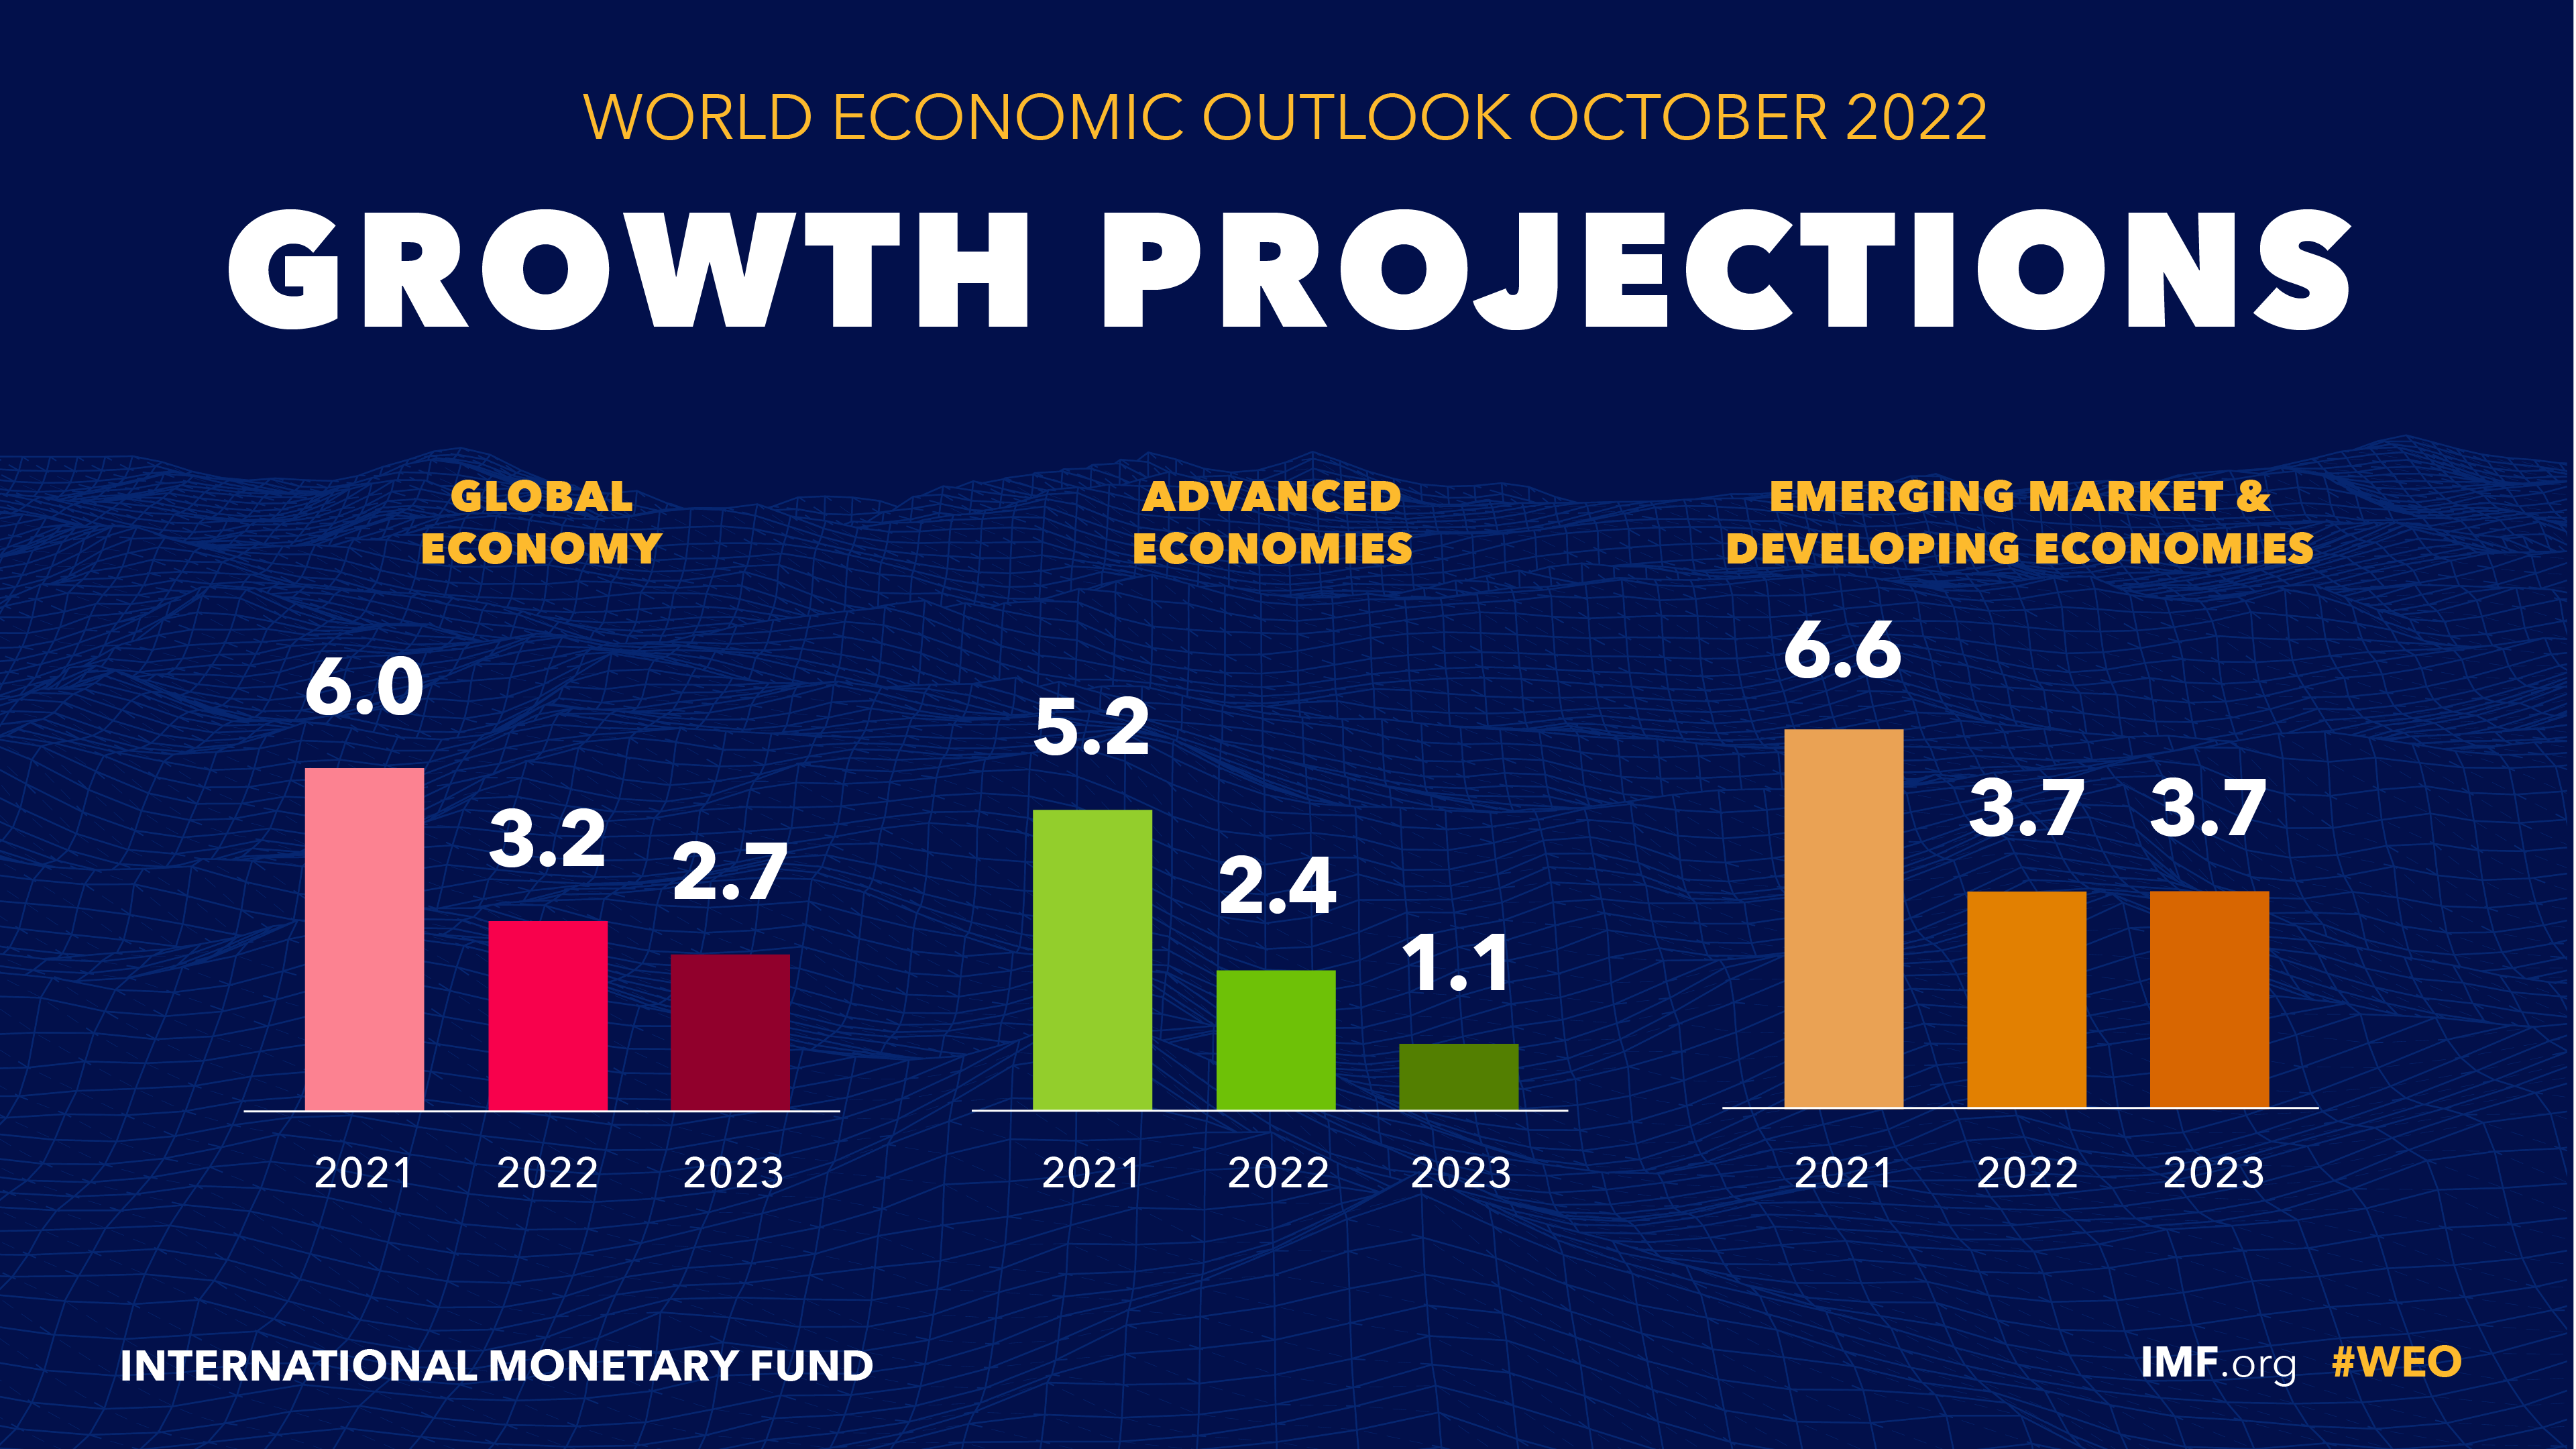 World Economic Outlook, October 2022 Countering the CostofLiving Crisis